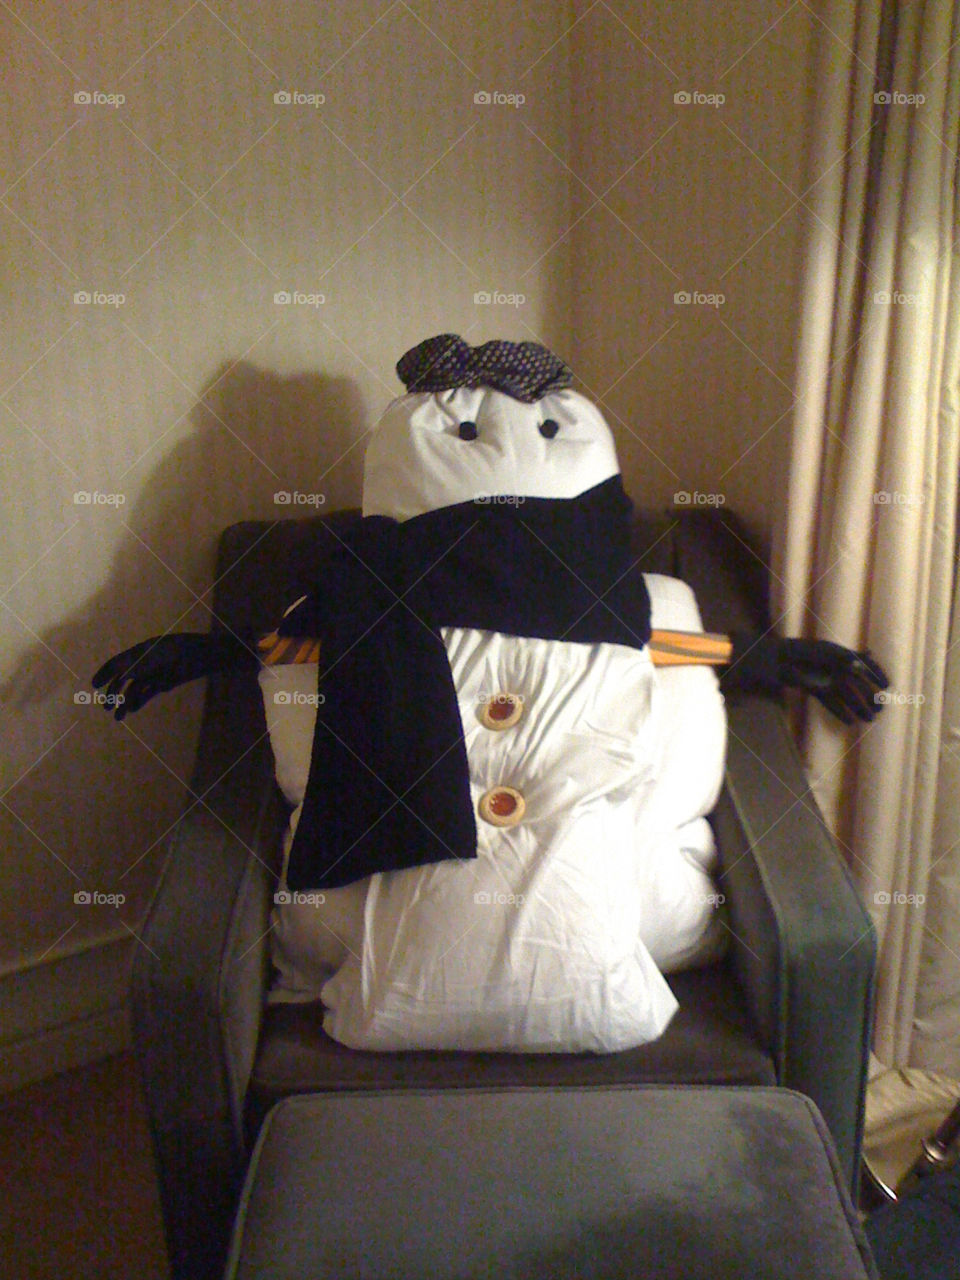 Building an indoor snowman made of pillows from our hotel room